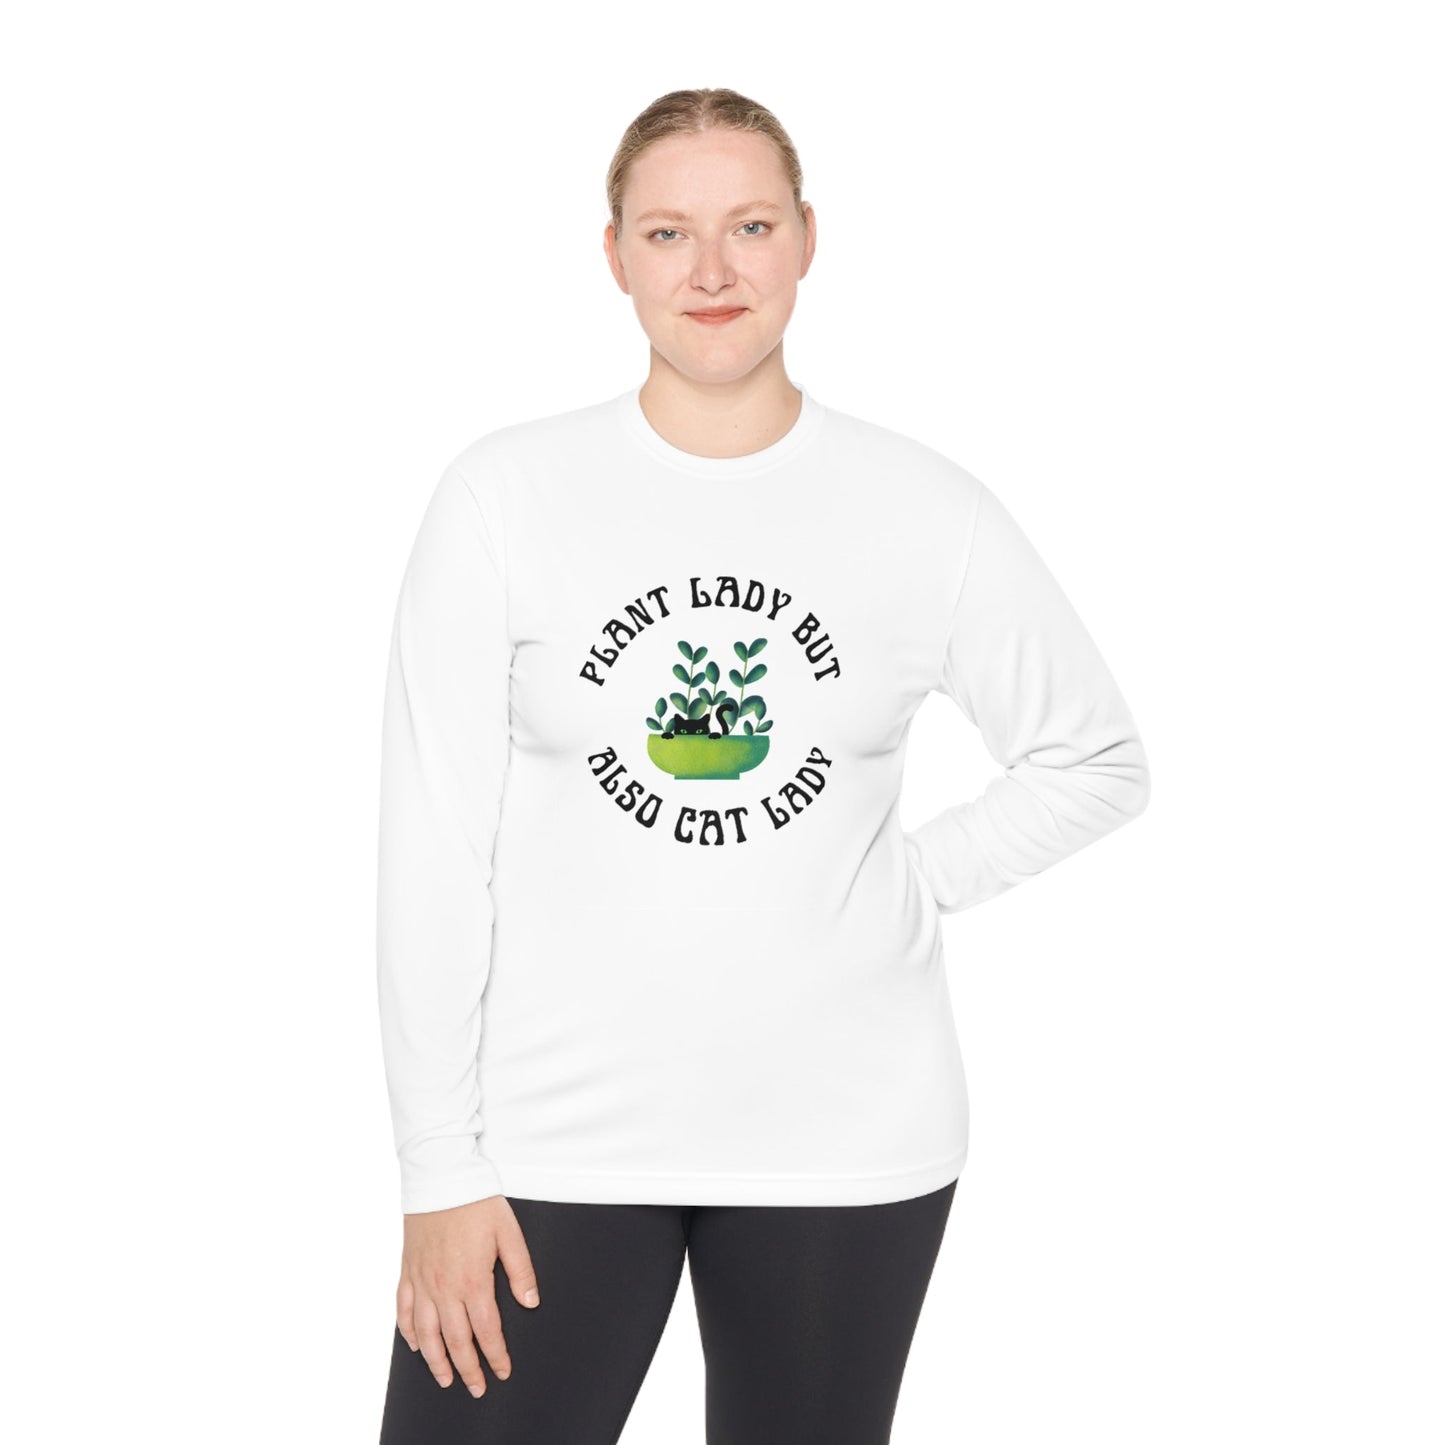 Plant Lady But Also Cat Lady Unisex Lightweight Long Sleeve Tee (Sizes through 4X)